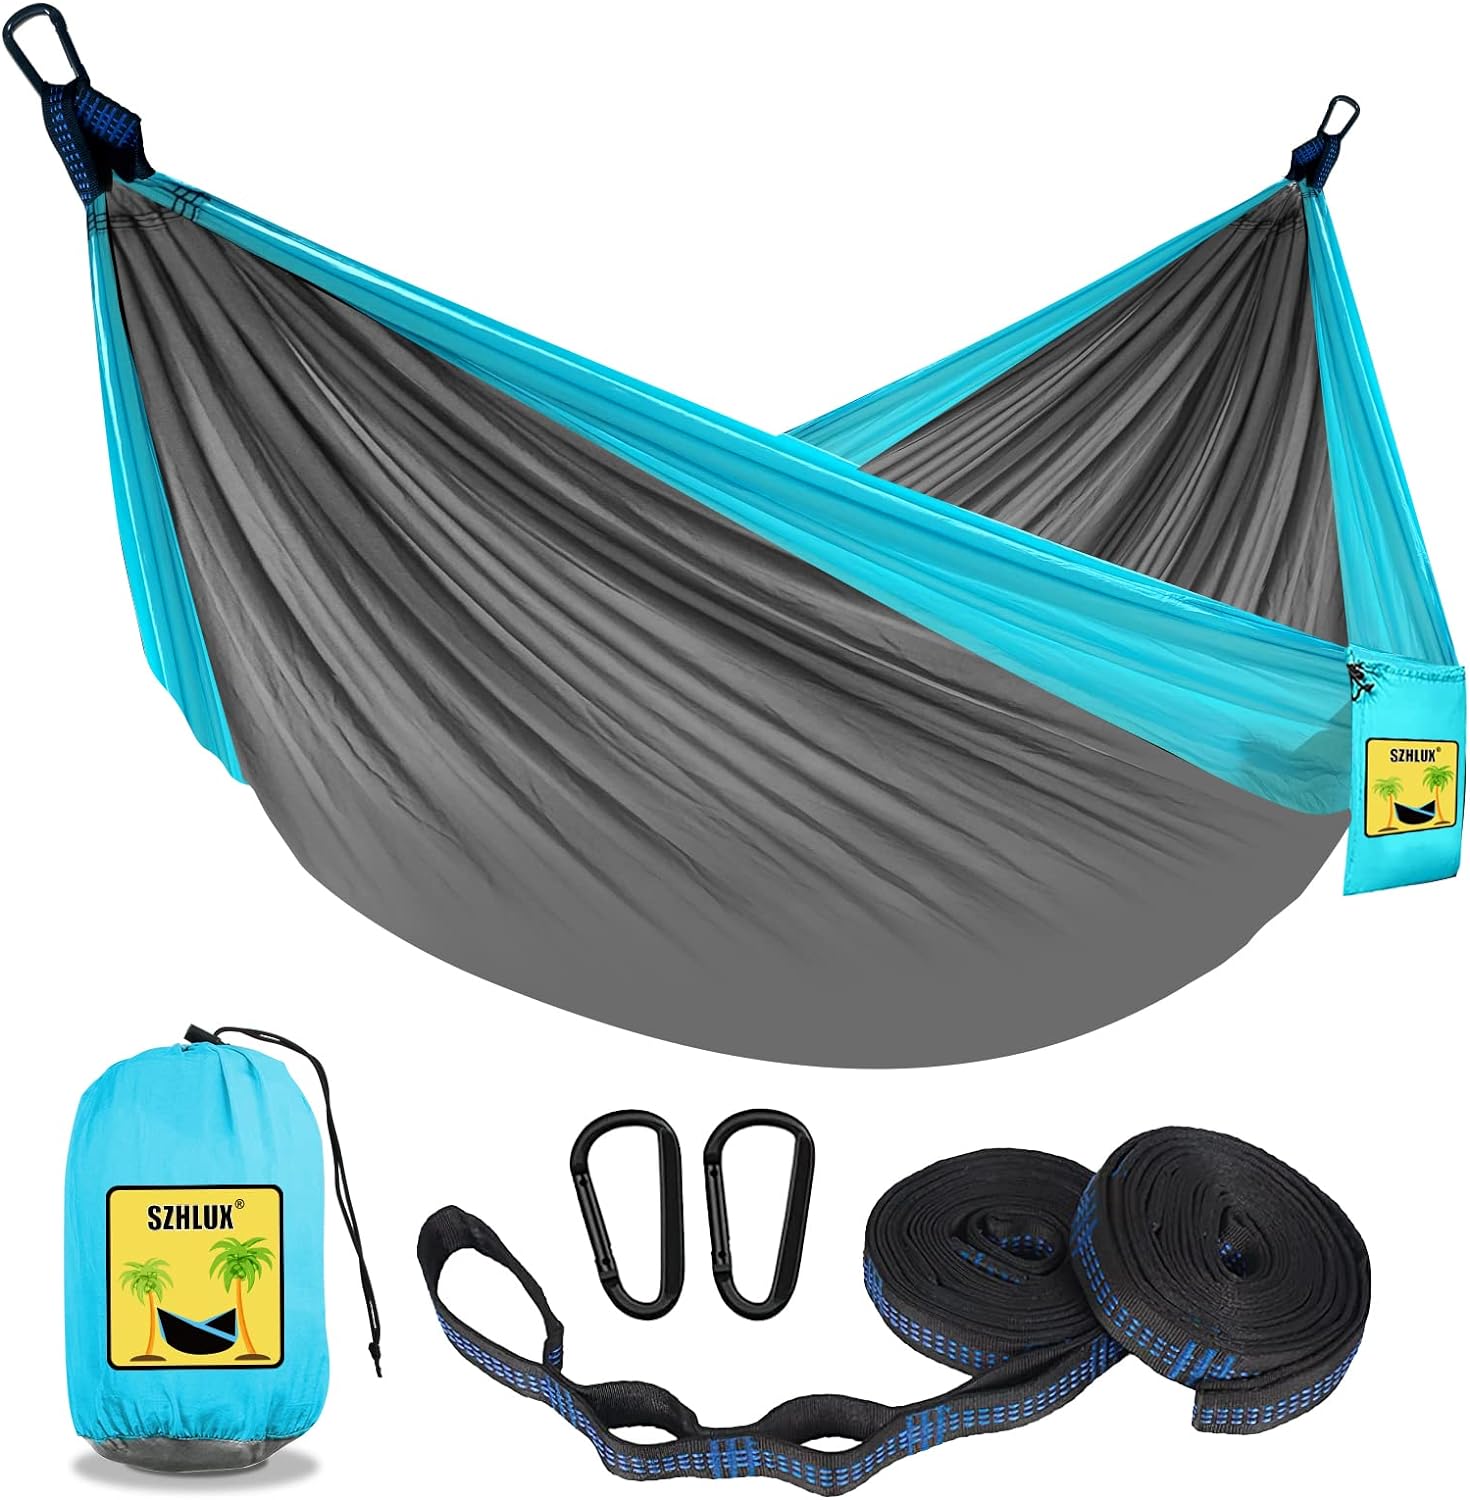 I've wanted a hammock for a while, and with a weekend camping trip coming up, I finally got this one. I'd never even used a hammock before, so I waited till everyone else left the campsite before I actually tried to get into it so I didn't look like a moron if I failed. Figured it out pretty quickly, though I'm still working out the ideal height for both getting into it and out of it. I'm 'older' so getting out is tough.The hammock is very easy to set up and to adjust. The straps give a lot of o